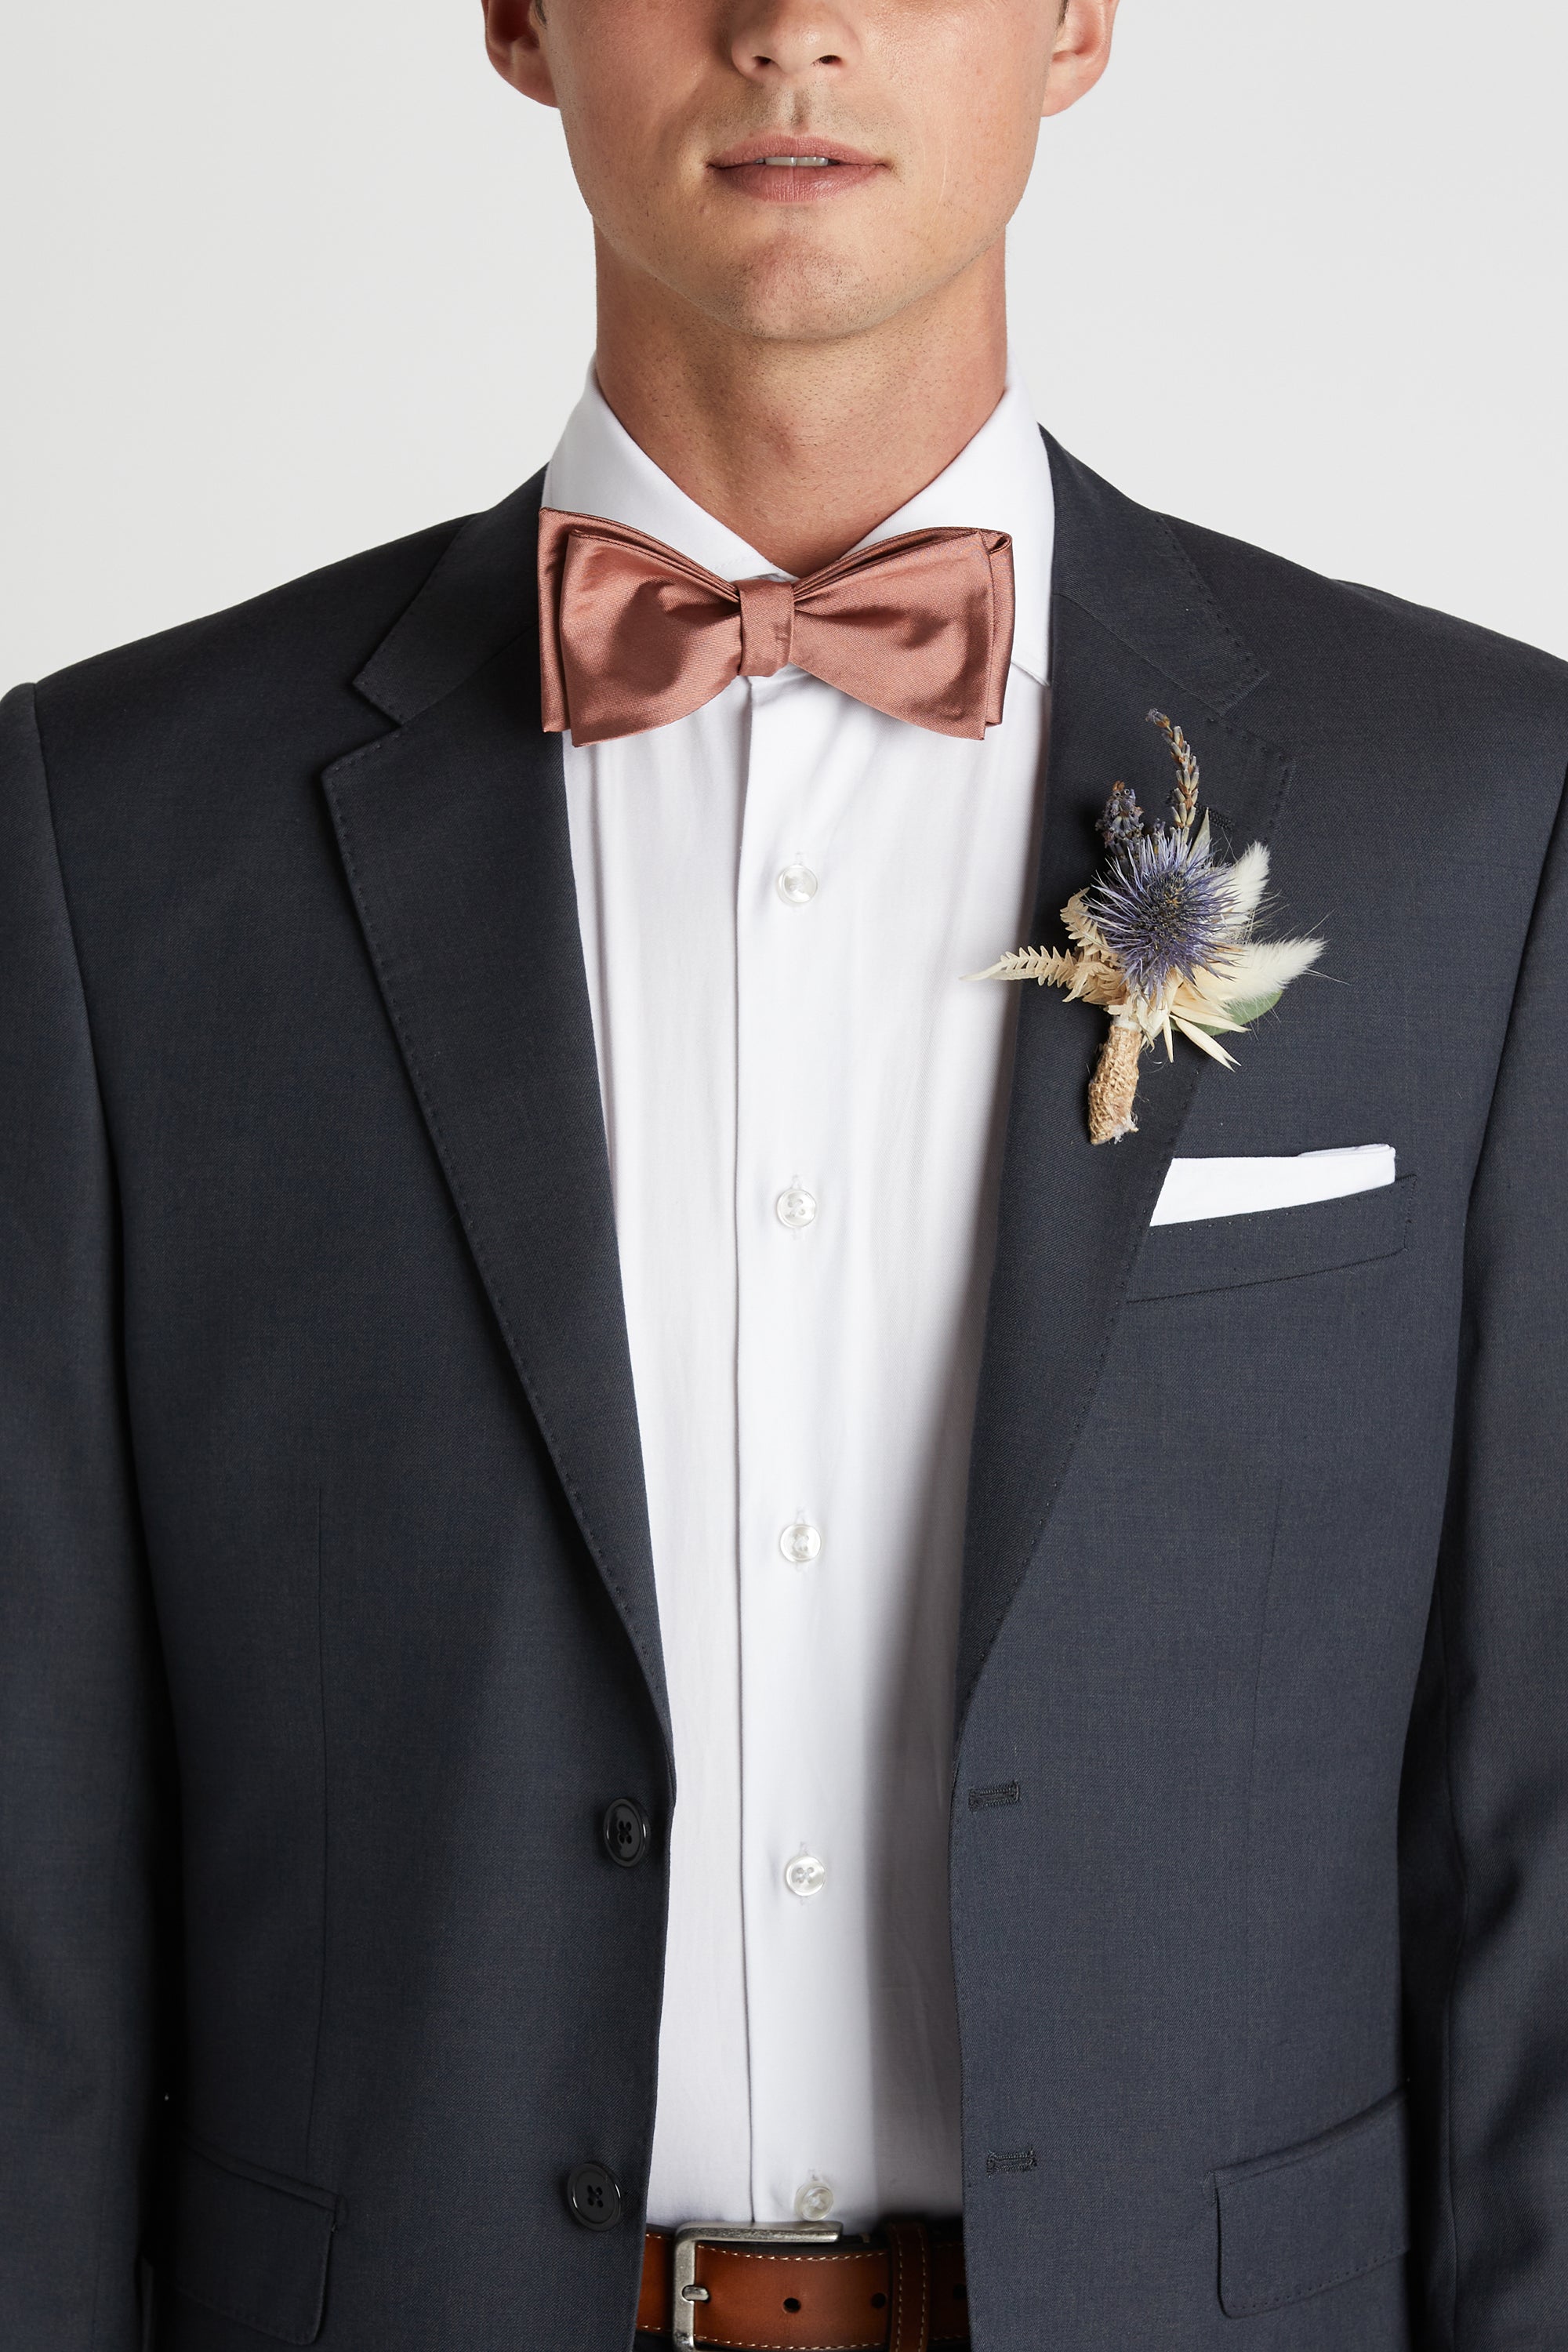 Rose Gold Bow Ties